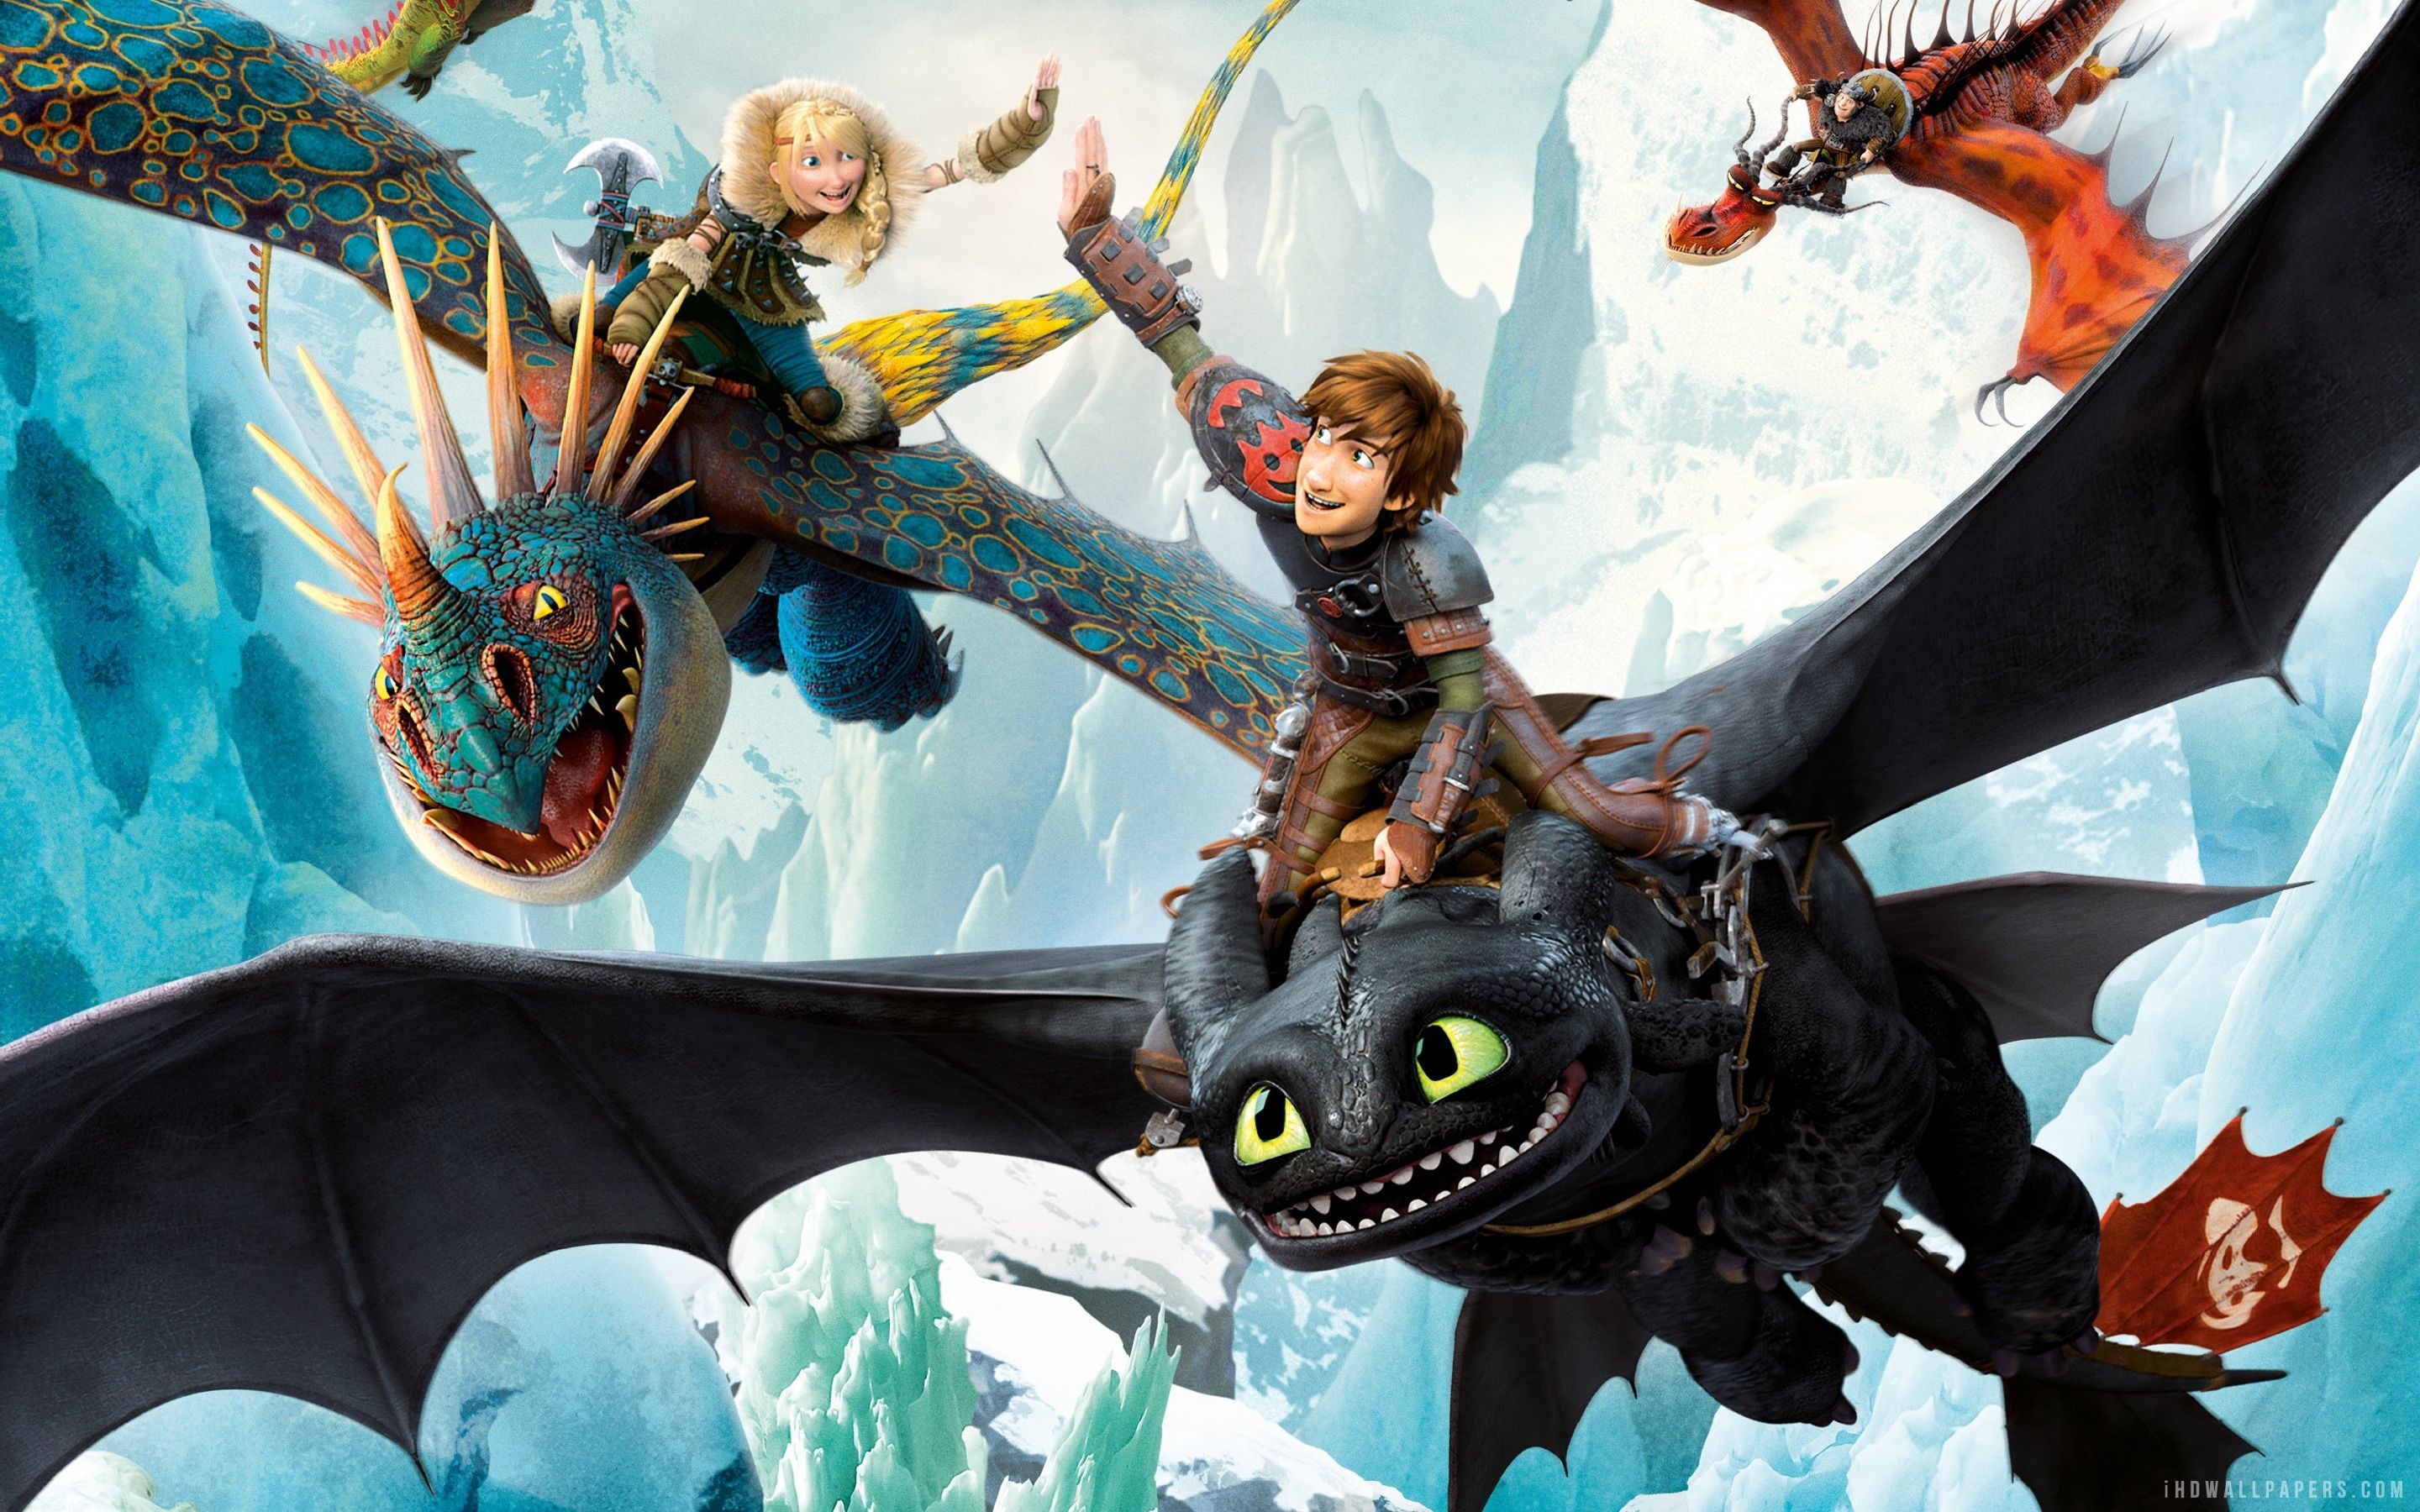 2880x1800 How to Train Your Dragon 3 Movie Wallpapers | WallpapersIn4k.net